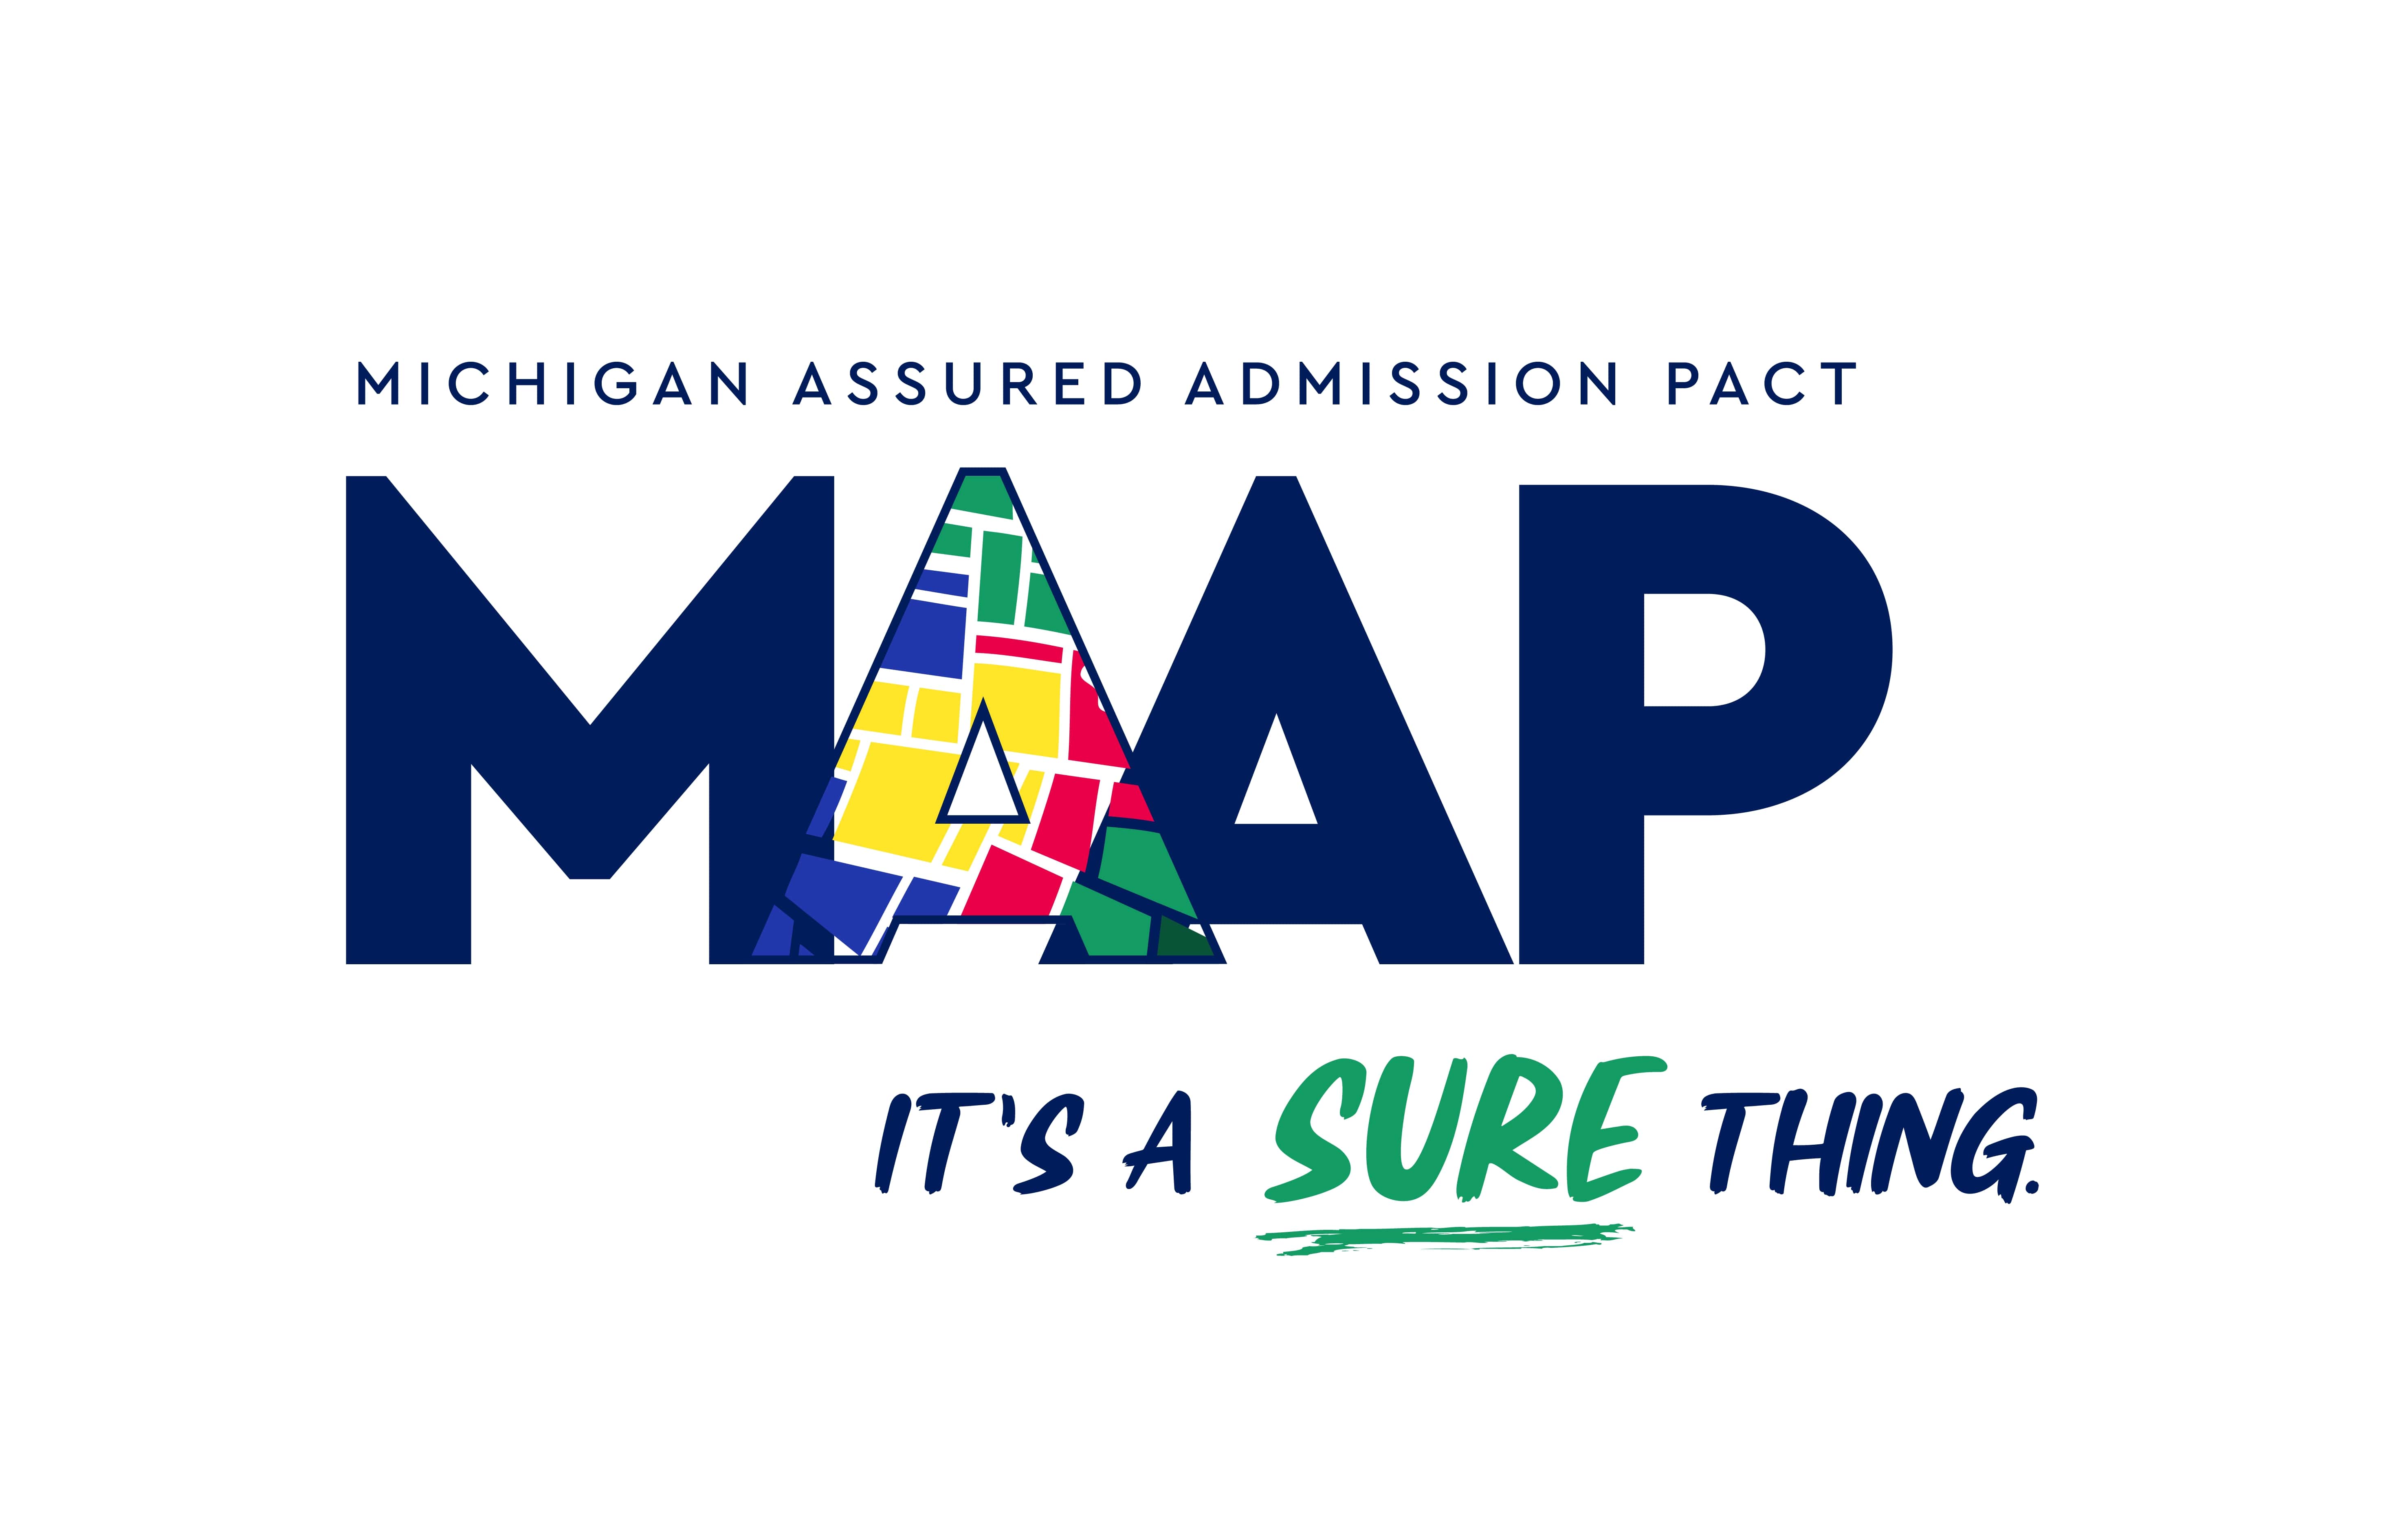 Michigan Assured Admission Pact(MAAP) logo in blue color with a tagline